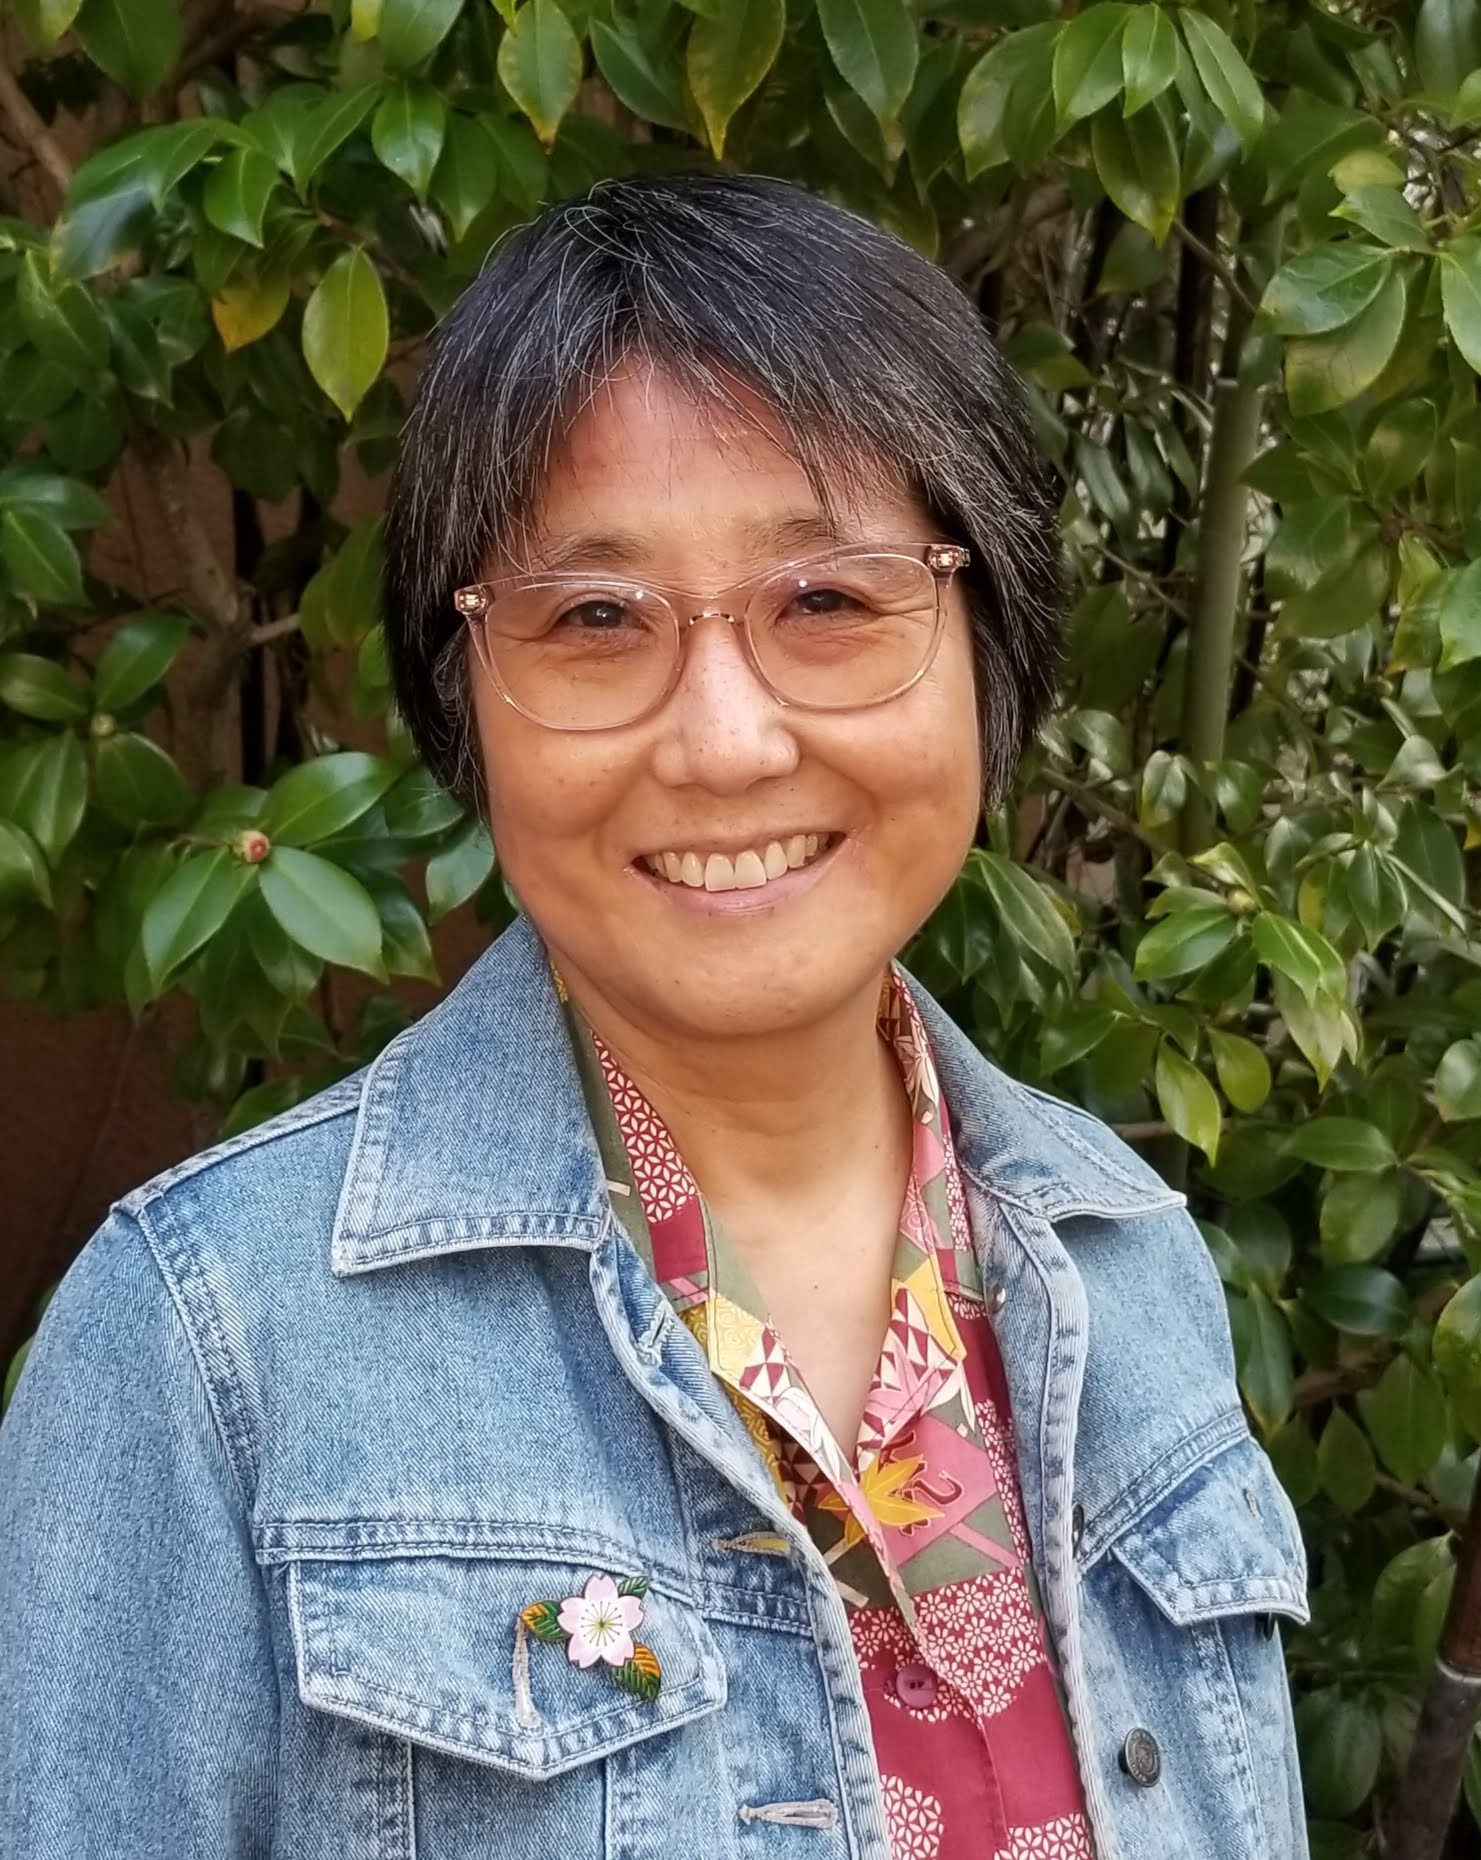 A photo of Kimi Hill smiling. She is wearing glasses and a denim jacket.